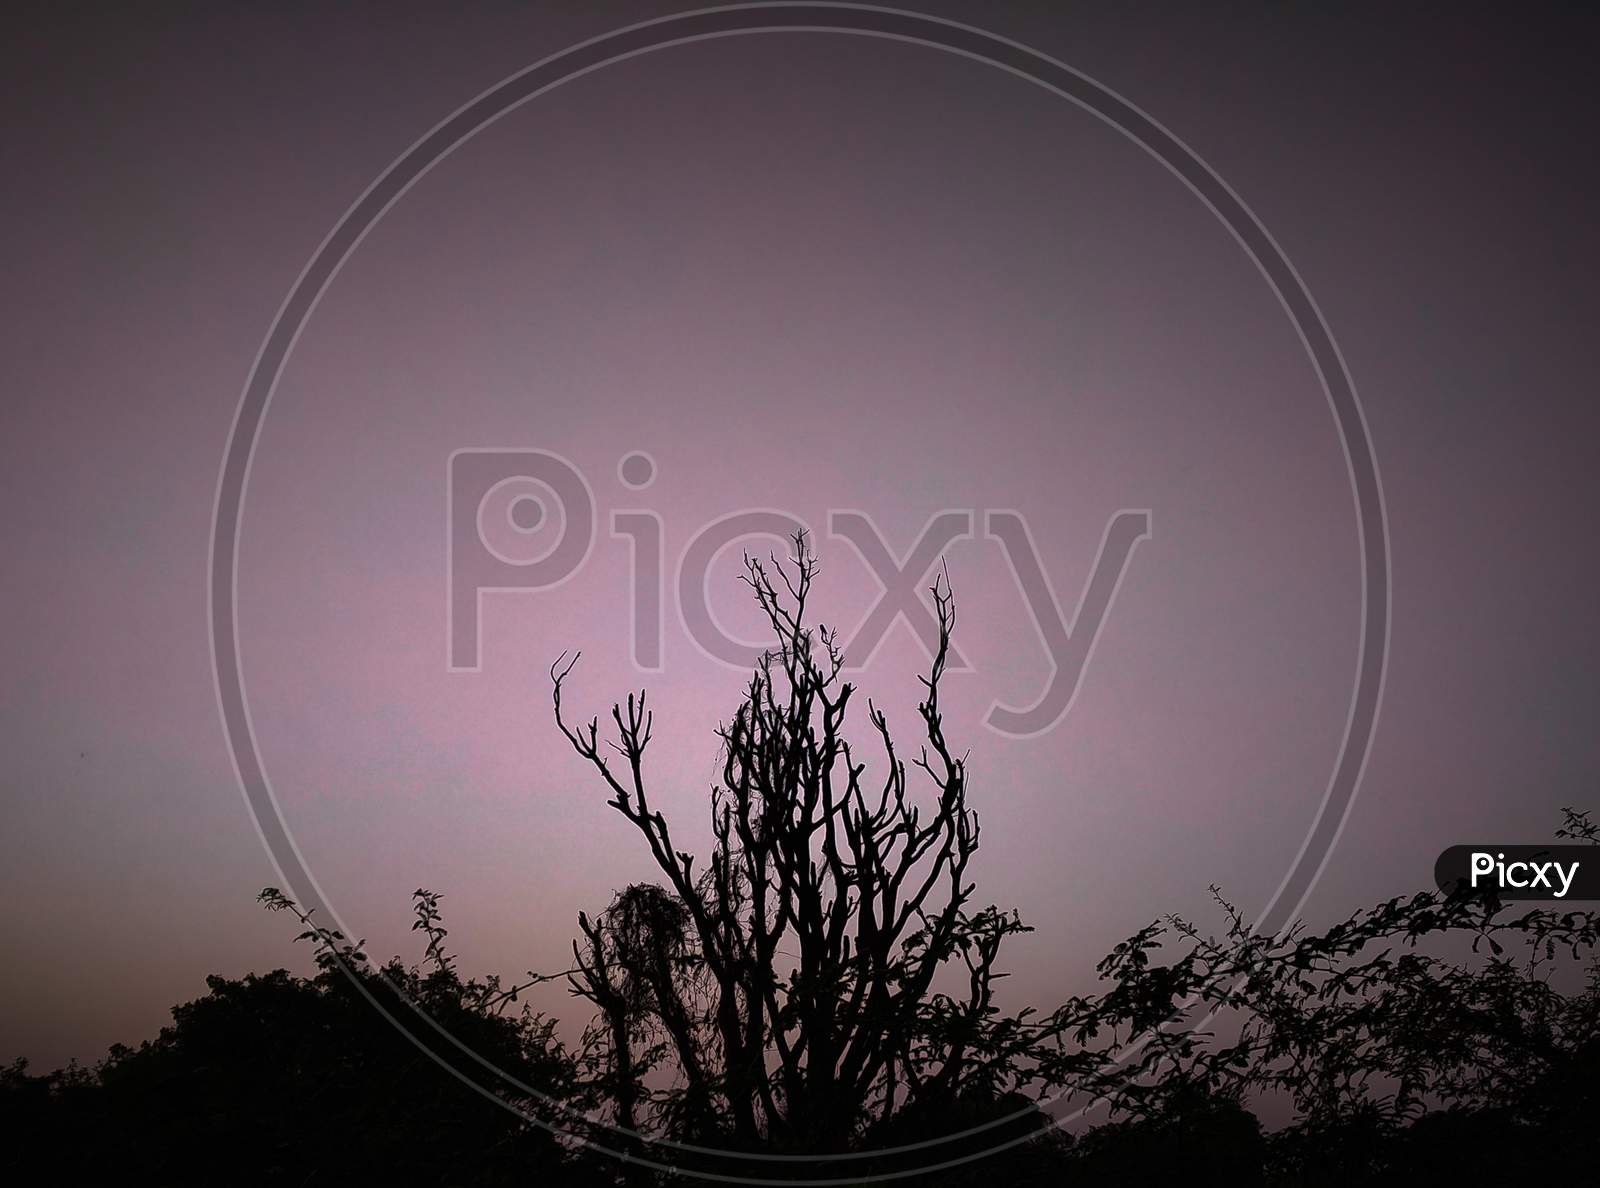 An Old Scary Tree In The Evening Sky As A Background With No Leaves.